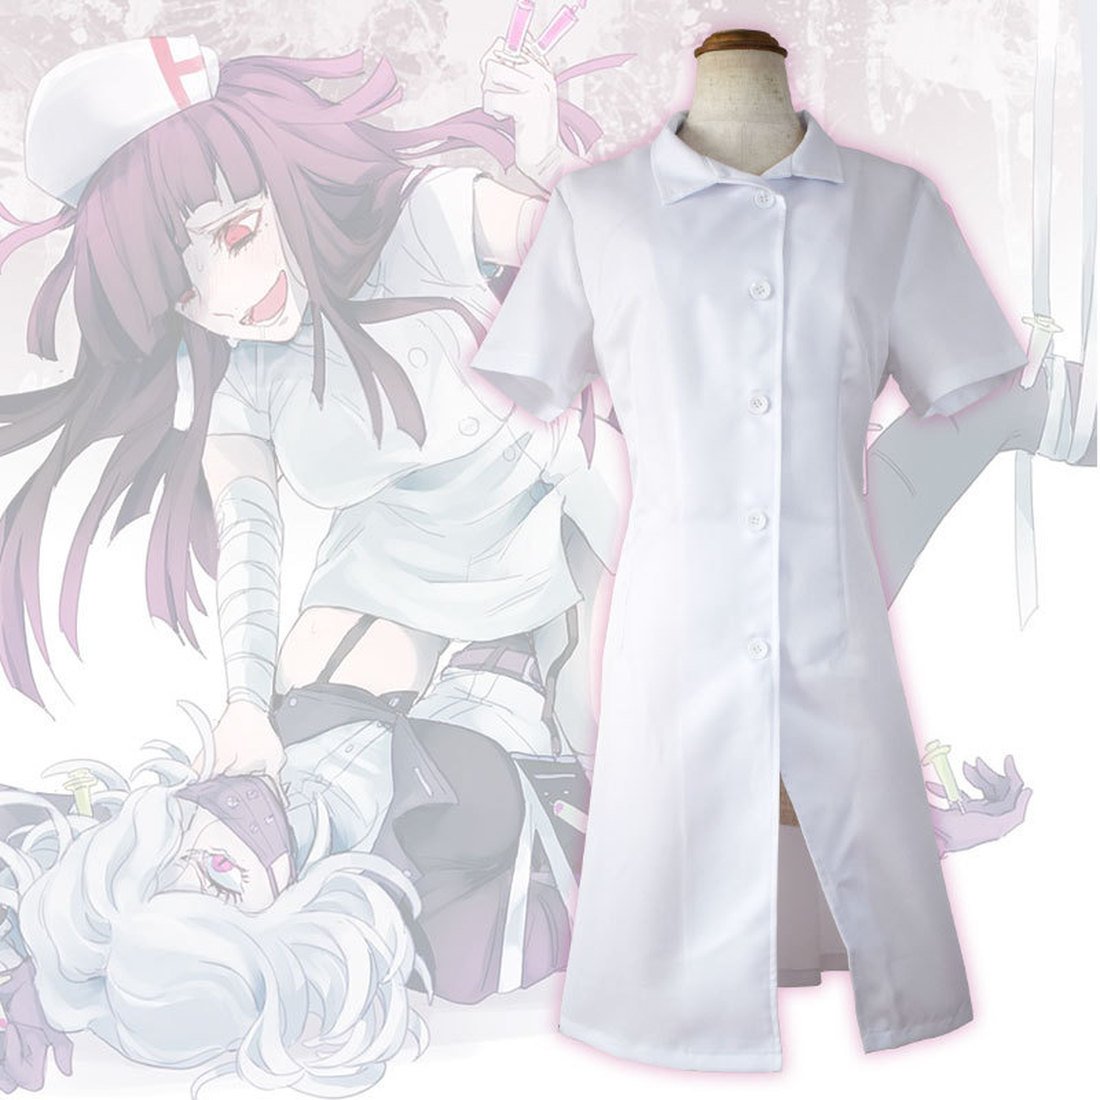 Mikan Tsumiki Cosplay Costume Hot Game Danganronpa Cosplay Suit Anime Cosplay Dress Hat Gloves Halloween Costumes for Women